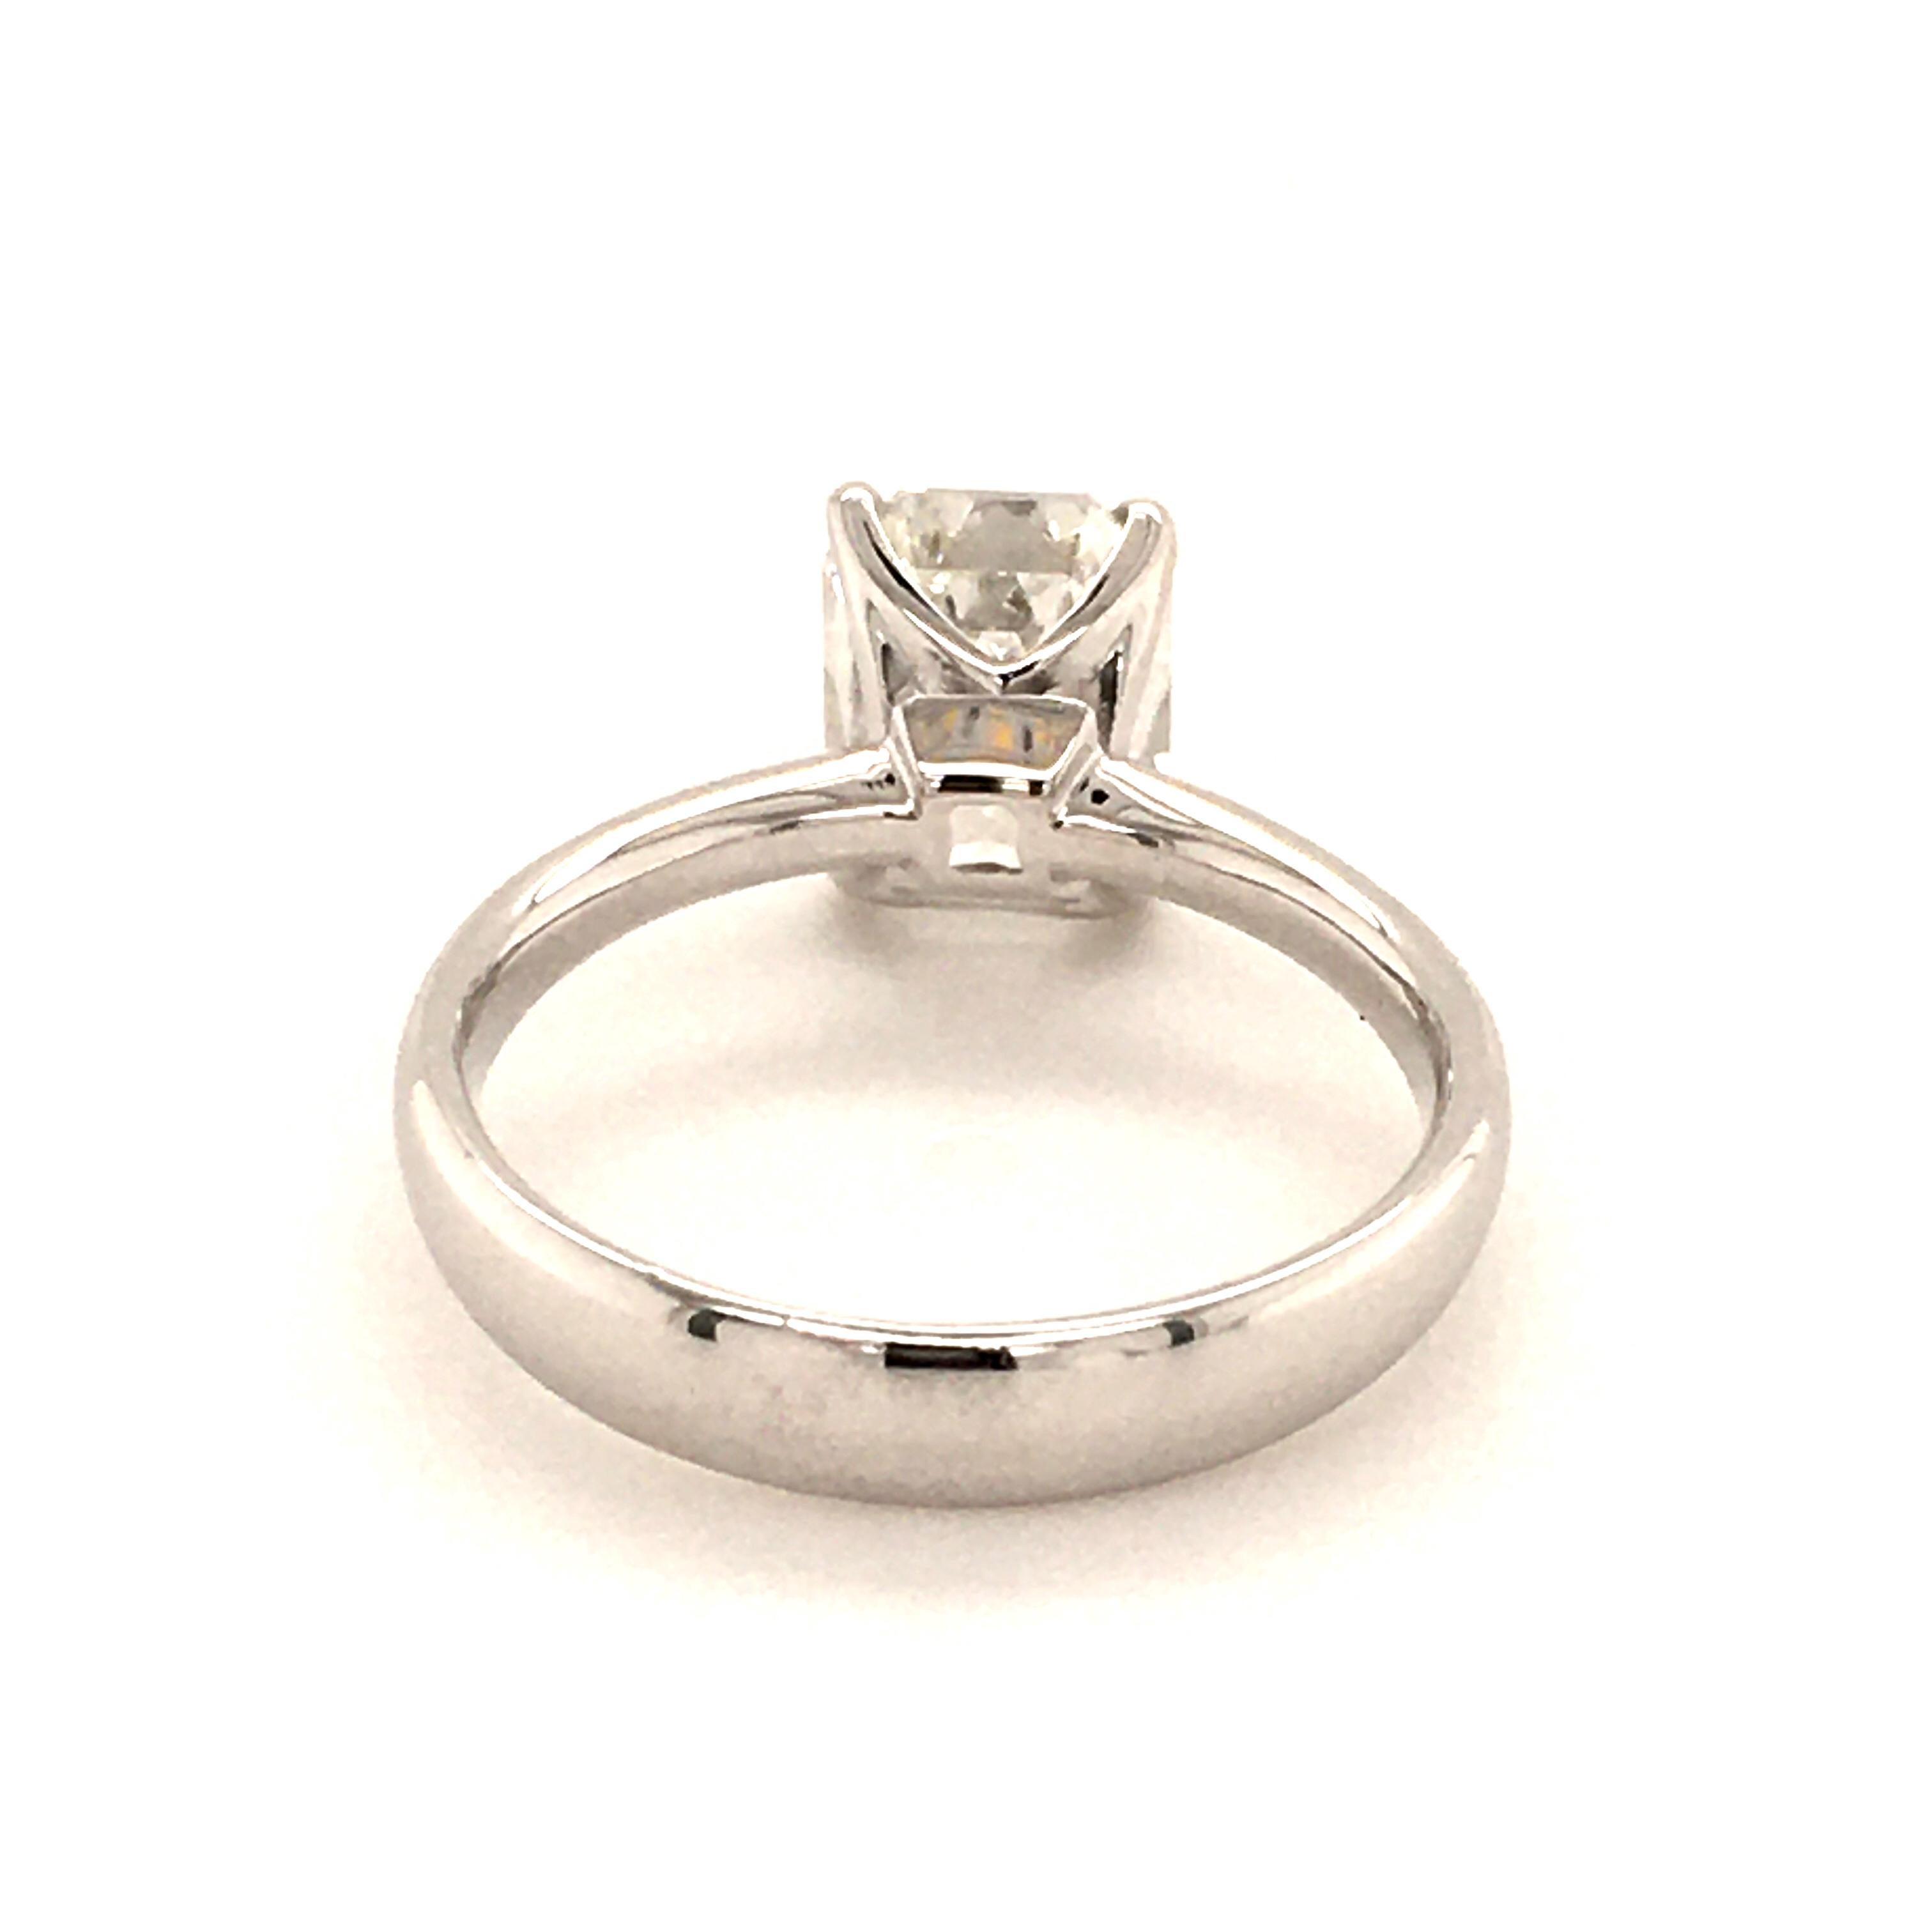 GIA Certified 3.01 Carat Emerald Cut Diamond White Gold Solitaire Ring For Sale 2